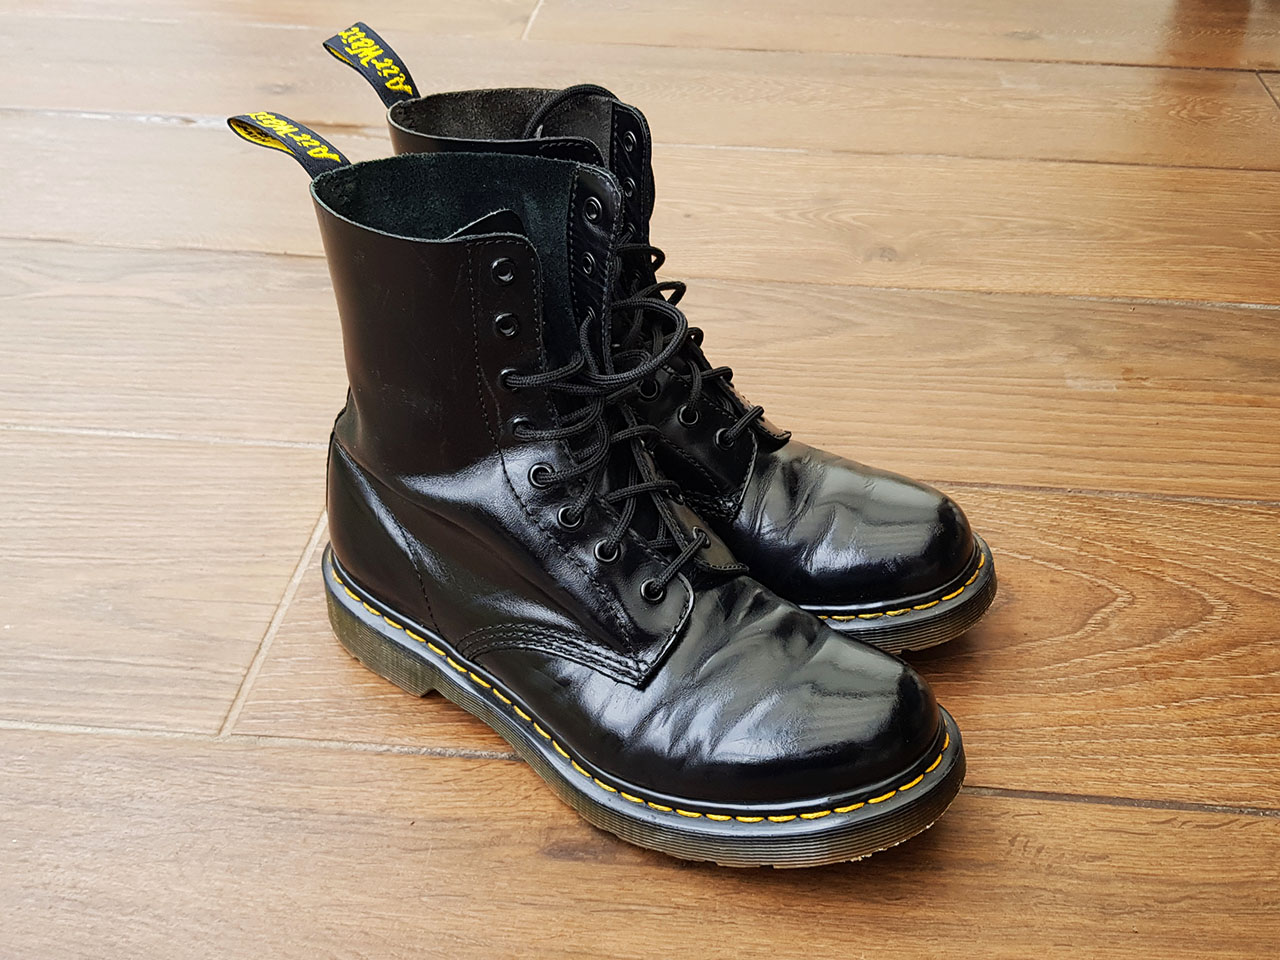 A pair of Doc Martens